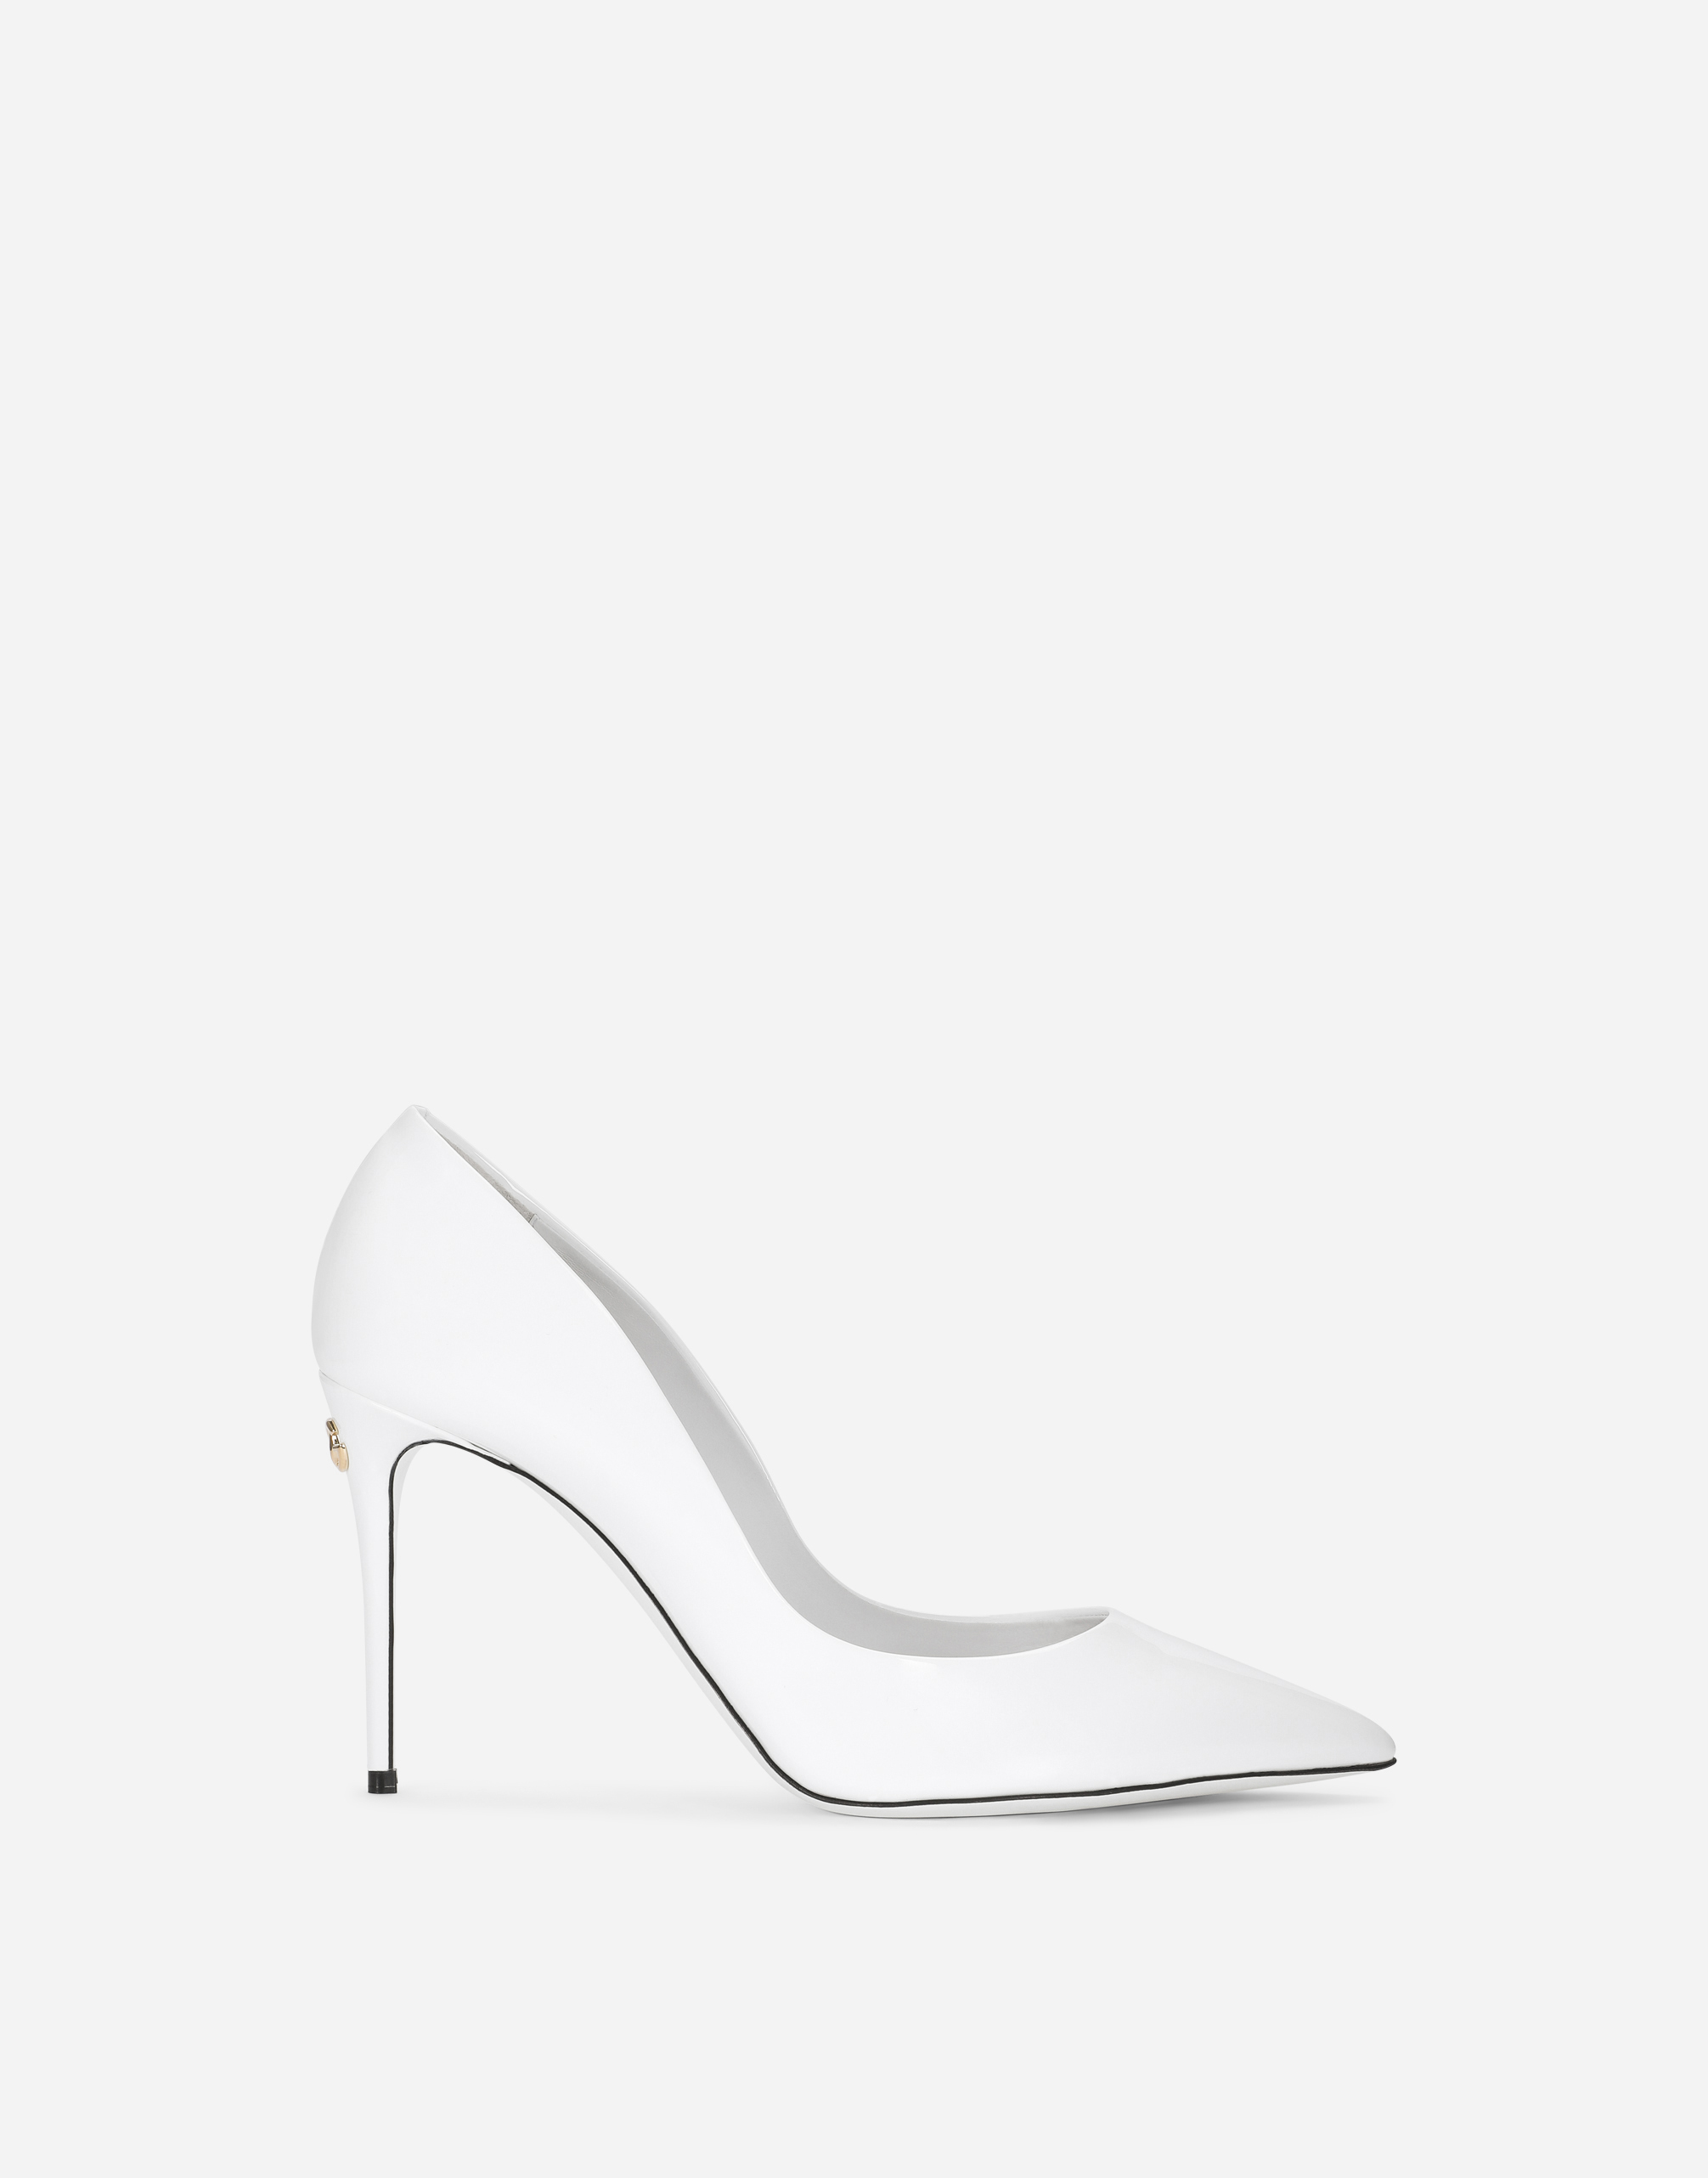 Dolce & Gabbana Patent Leather Cardinale Pumps In White